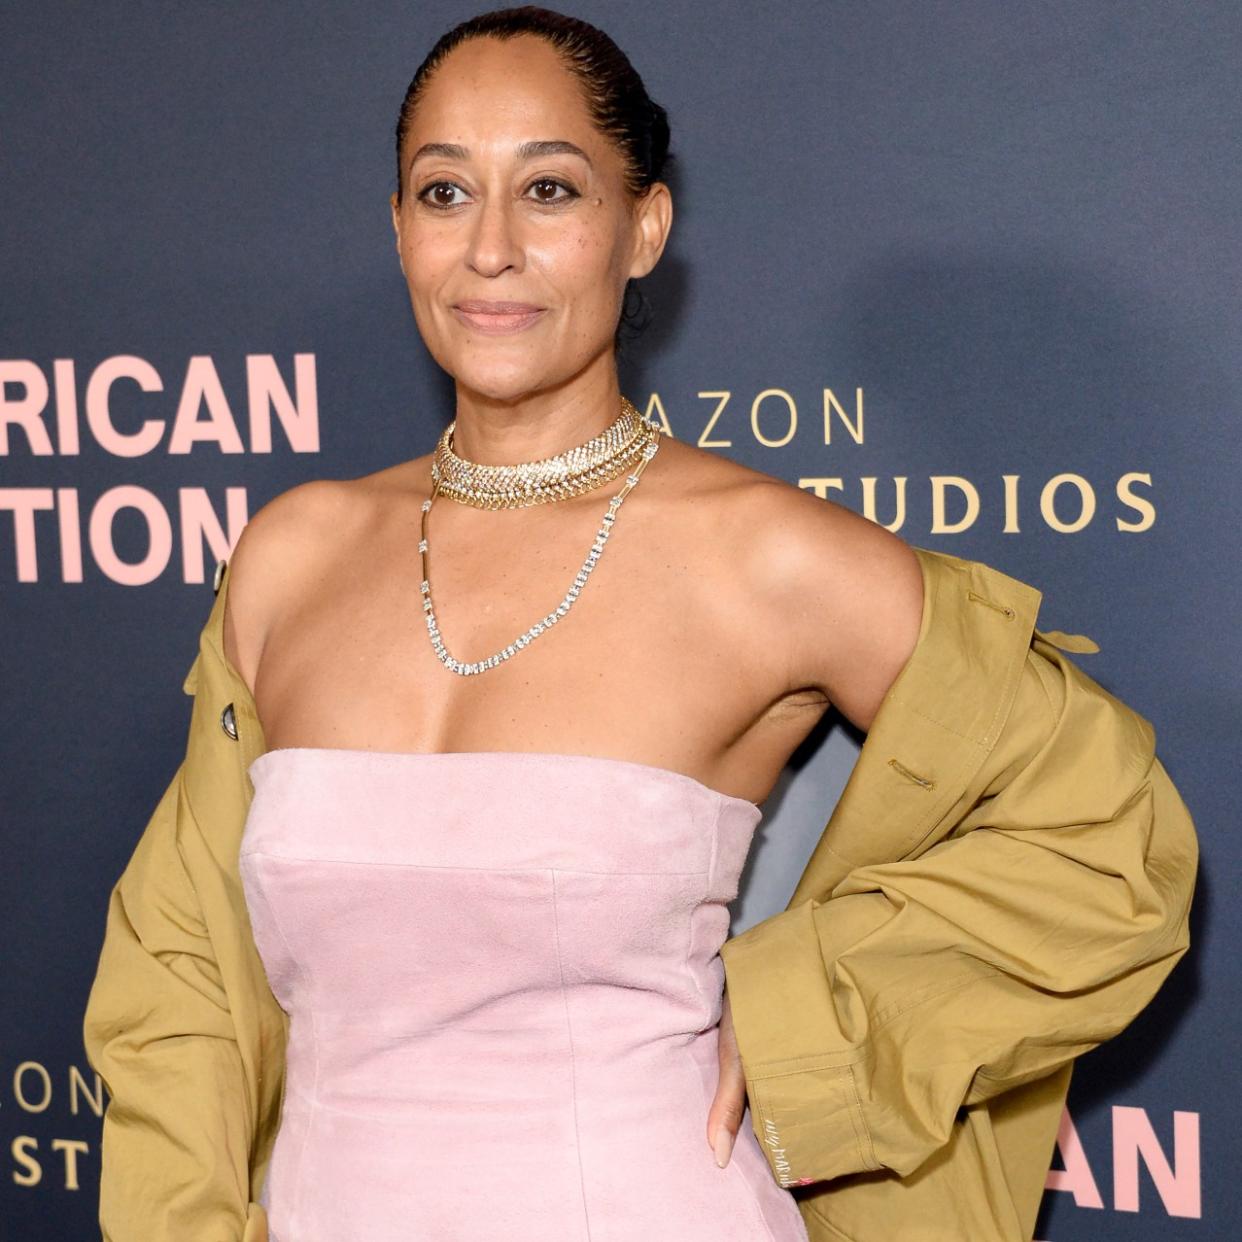  Tracee Ellis Ross at the "American Fiction" premiere. 